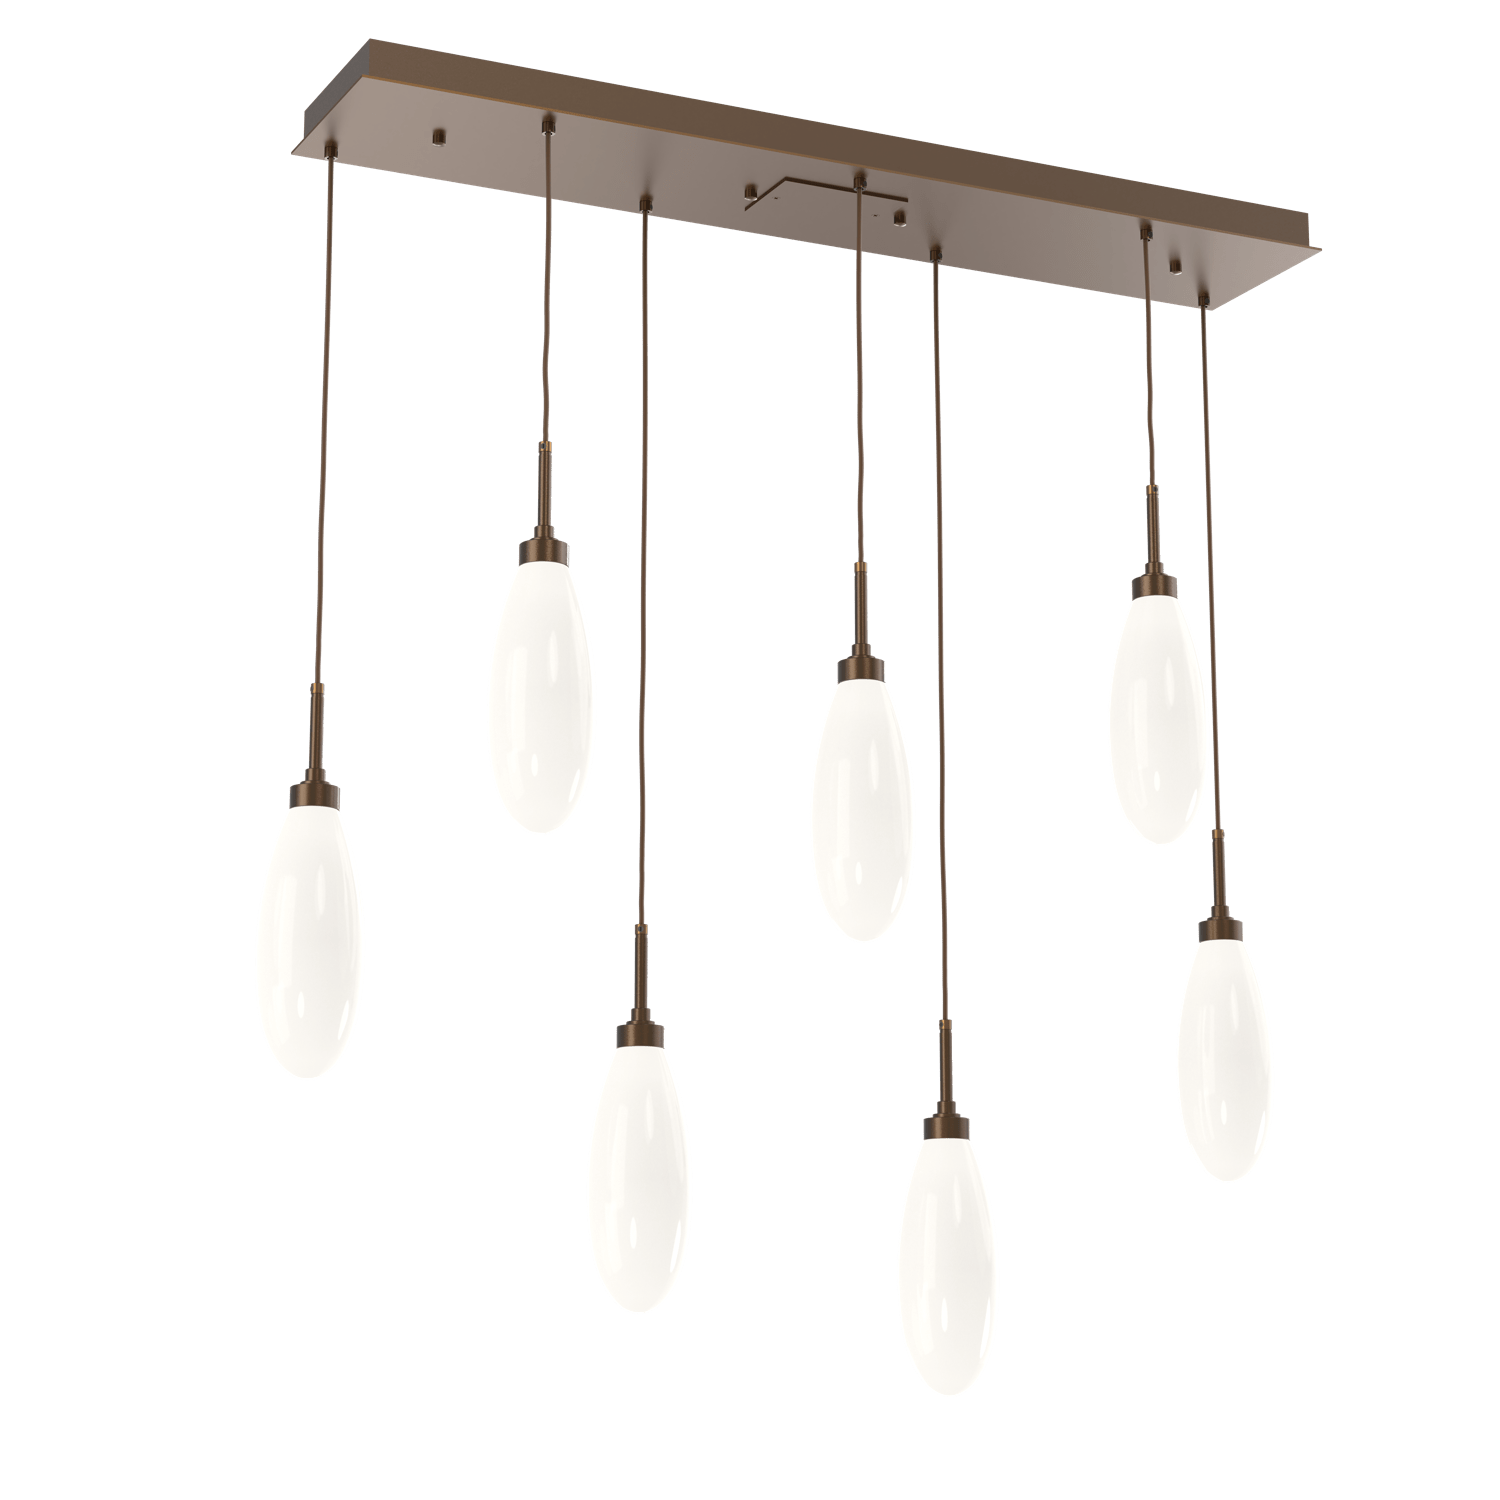 PLB0071-07-FB-WL-LL-Hammerton-Studio-Fiori-7-light-linear-pendant-chandelier-with-flat-bronze-finish-and-opal-white-glass-shades-and-LED-lamping